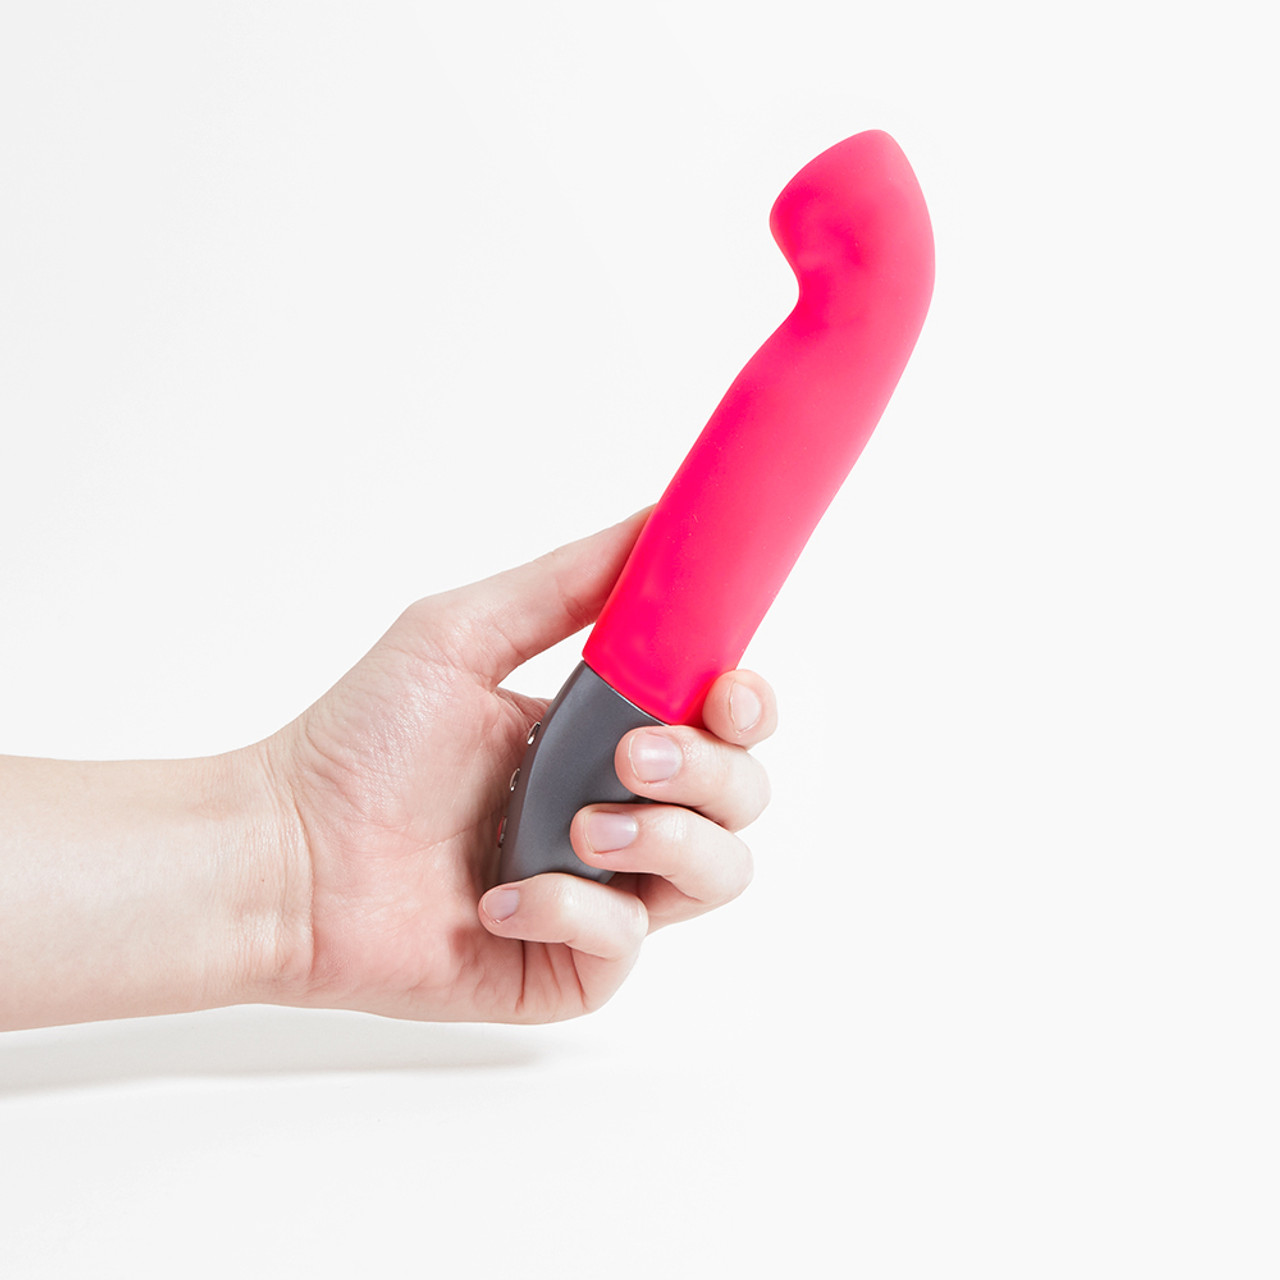 Fun Factory Stronic G', a bright pulsator with a grey handle held in a hand, against a white background 